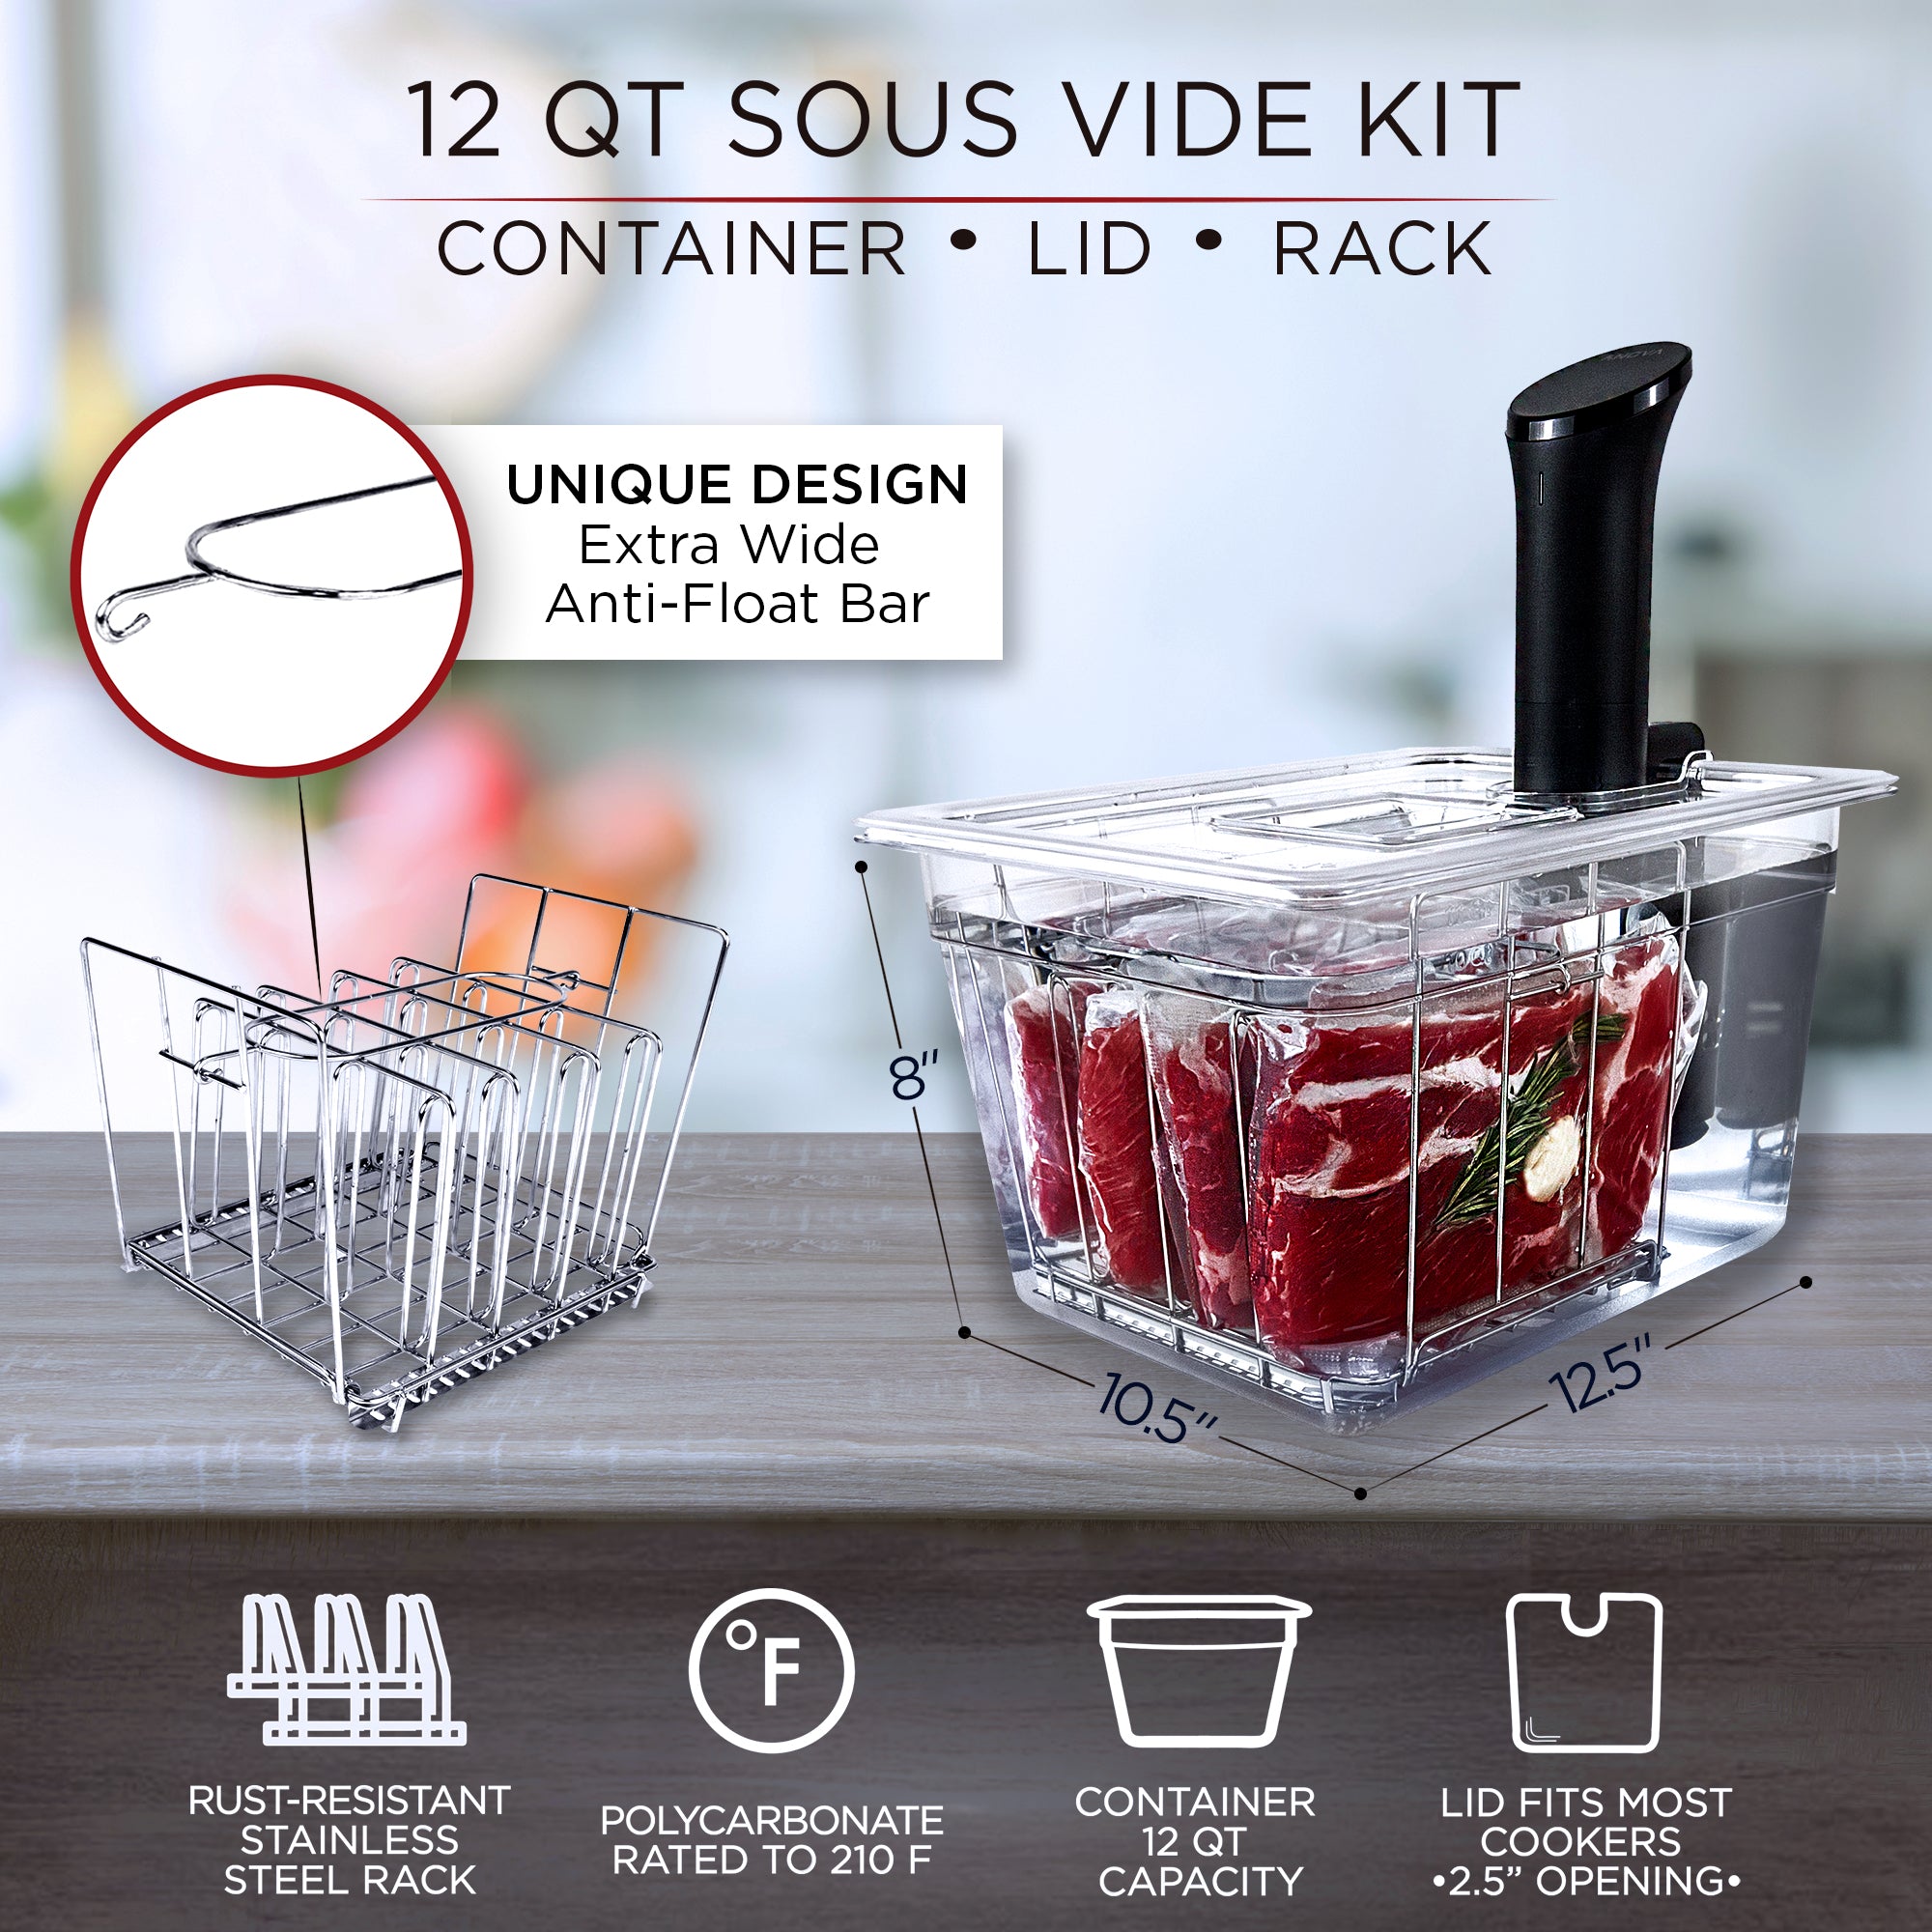  Greater Goods Sous Vide Kit - 12 Qt Container, Stainless Steel  Rack, Insulation Sleeve, and Lid, Designed in St. Louis (Onyx Black): Home  & Kitchen